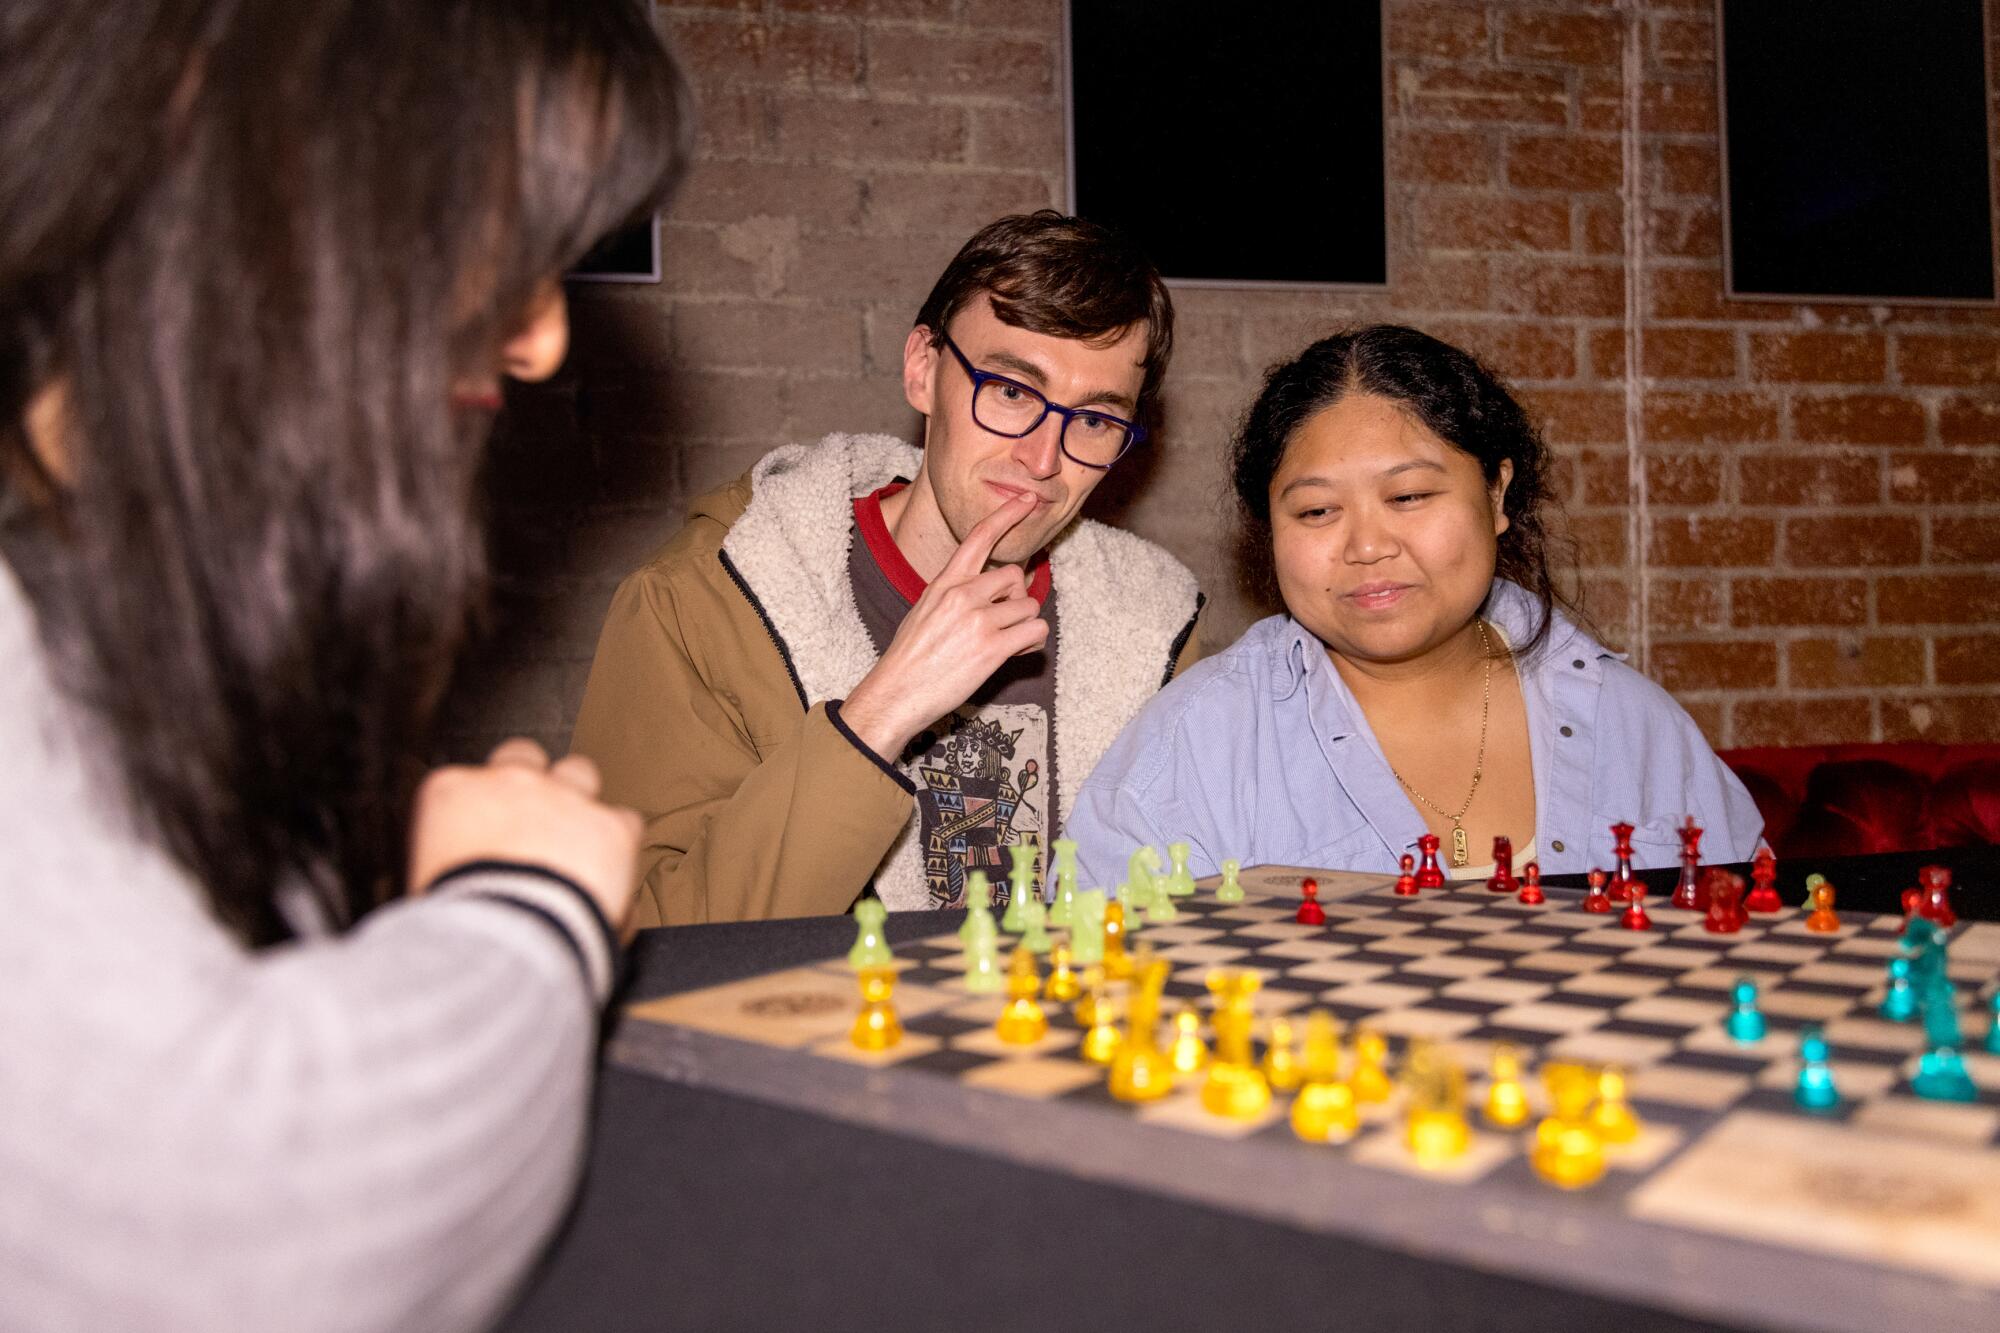 Three people play chess on a multiplayer board.